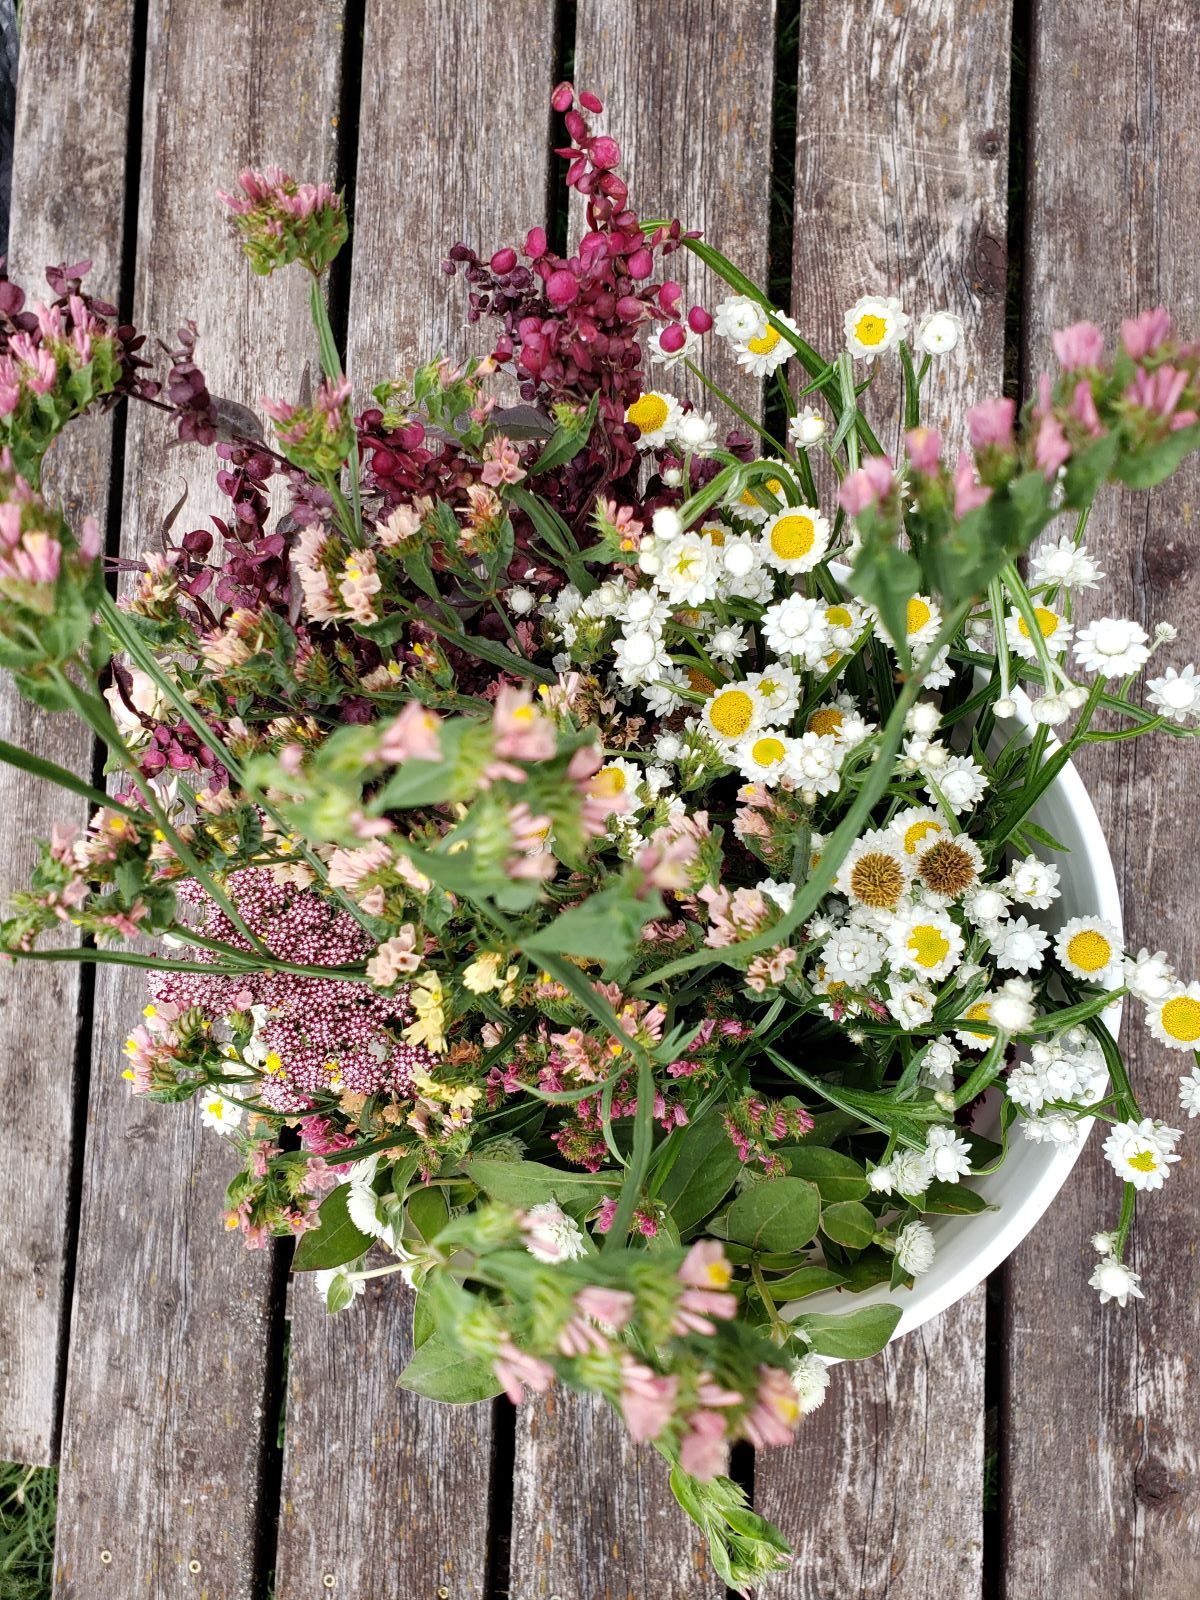 Bucket of flowers to dry